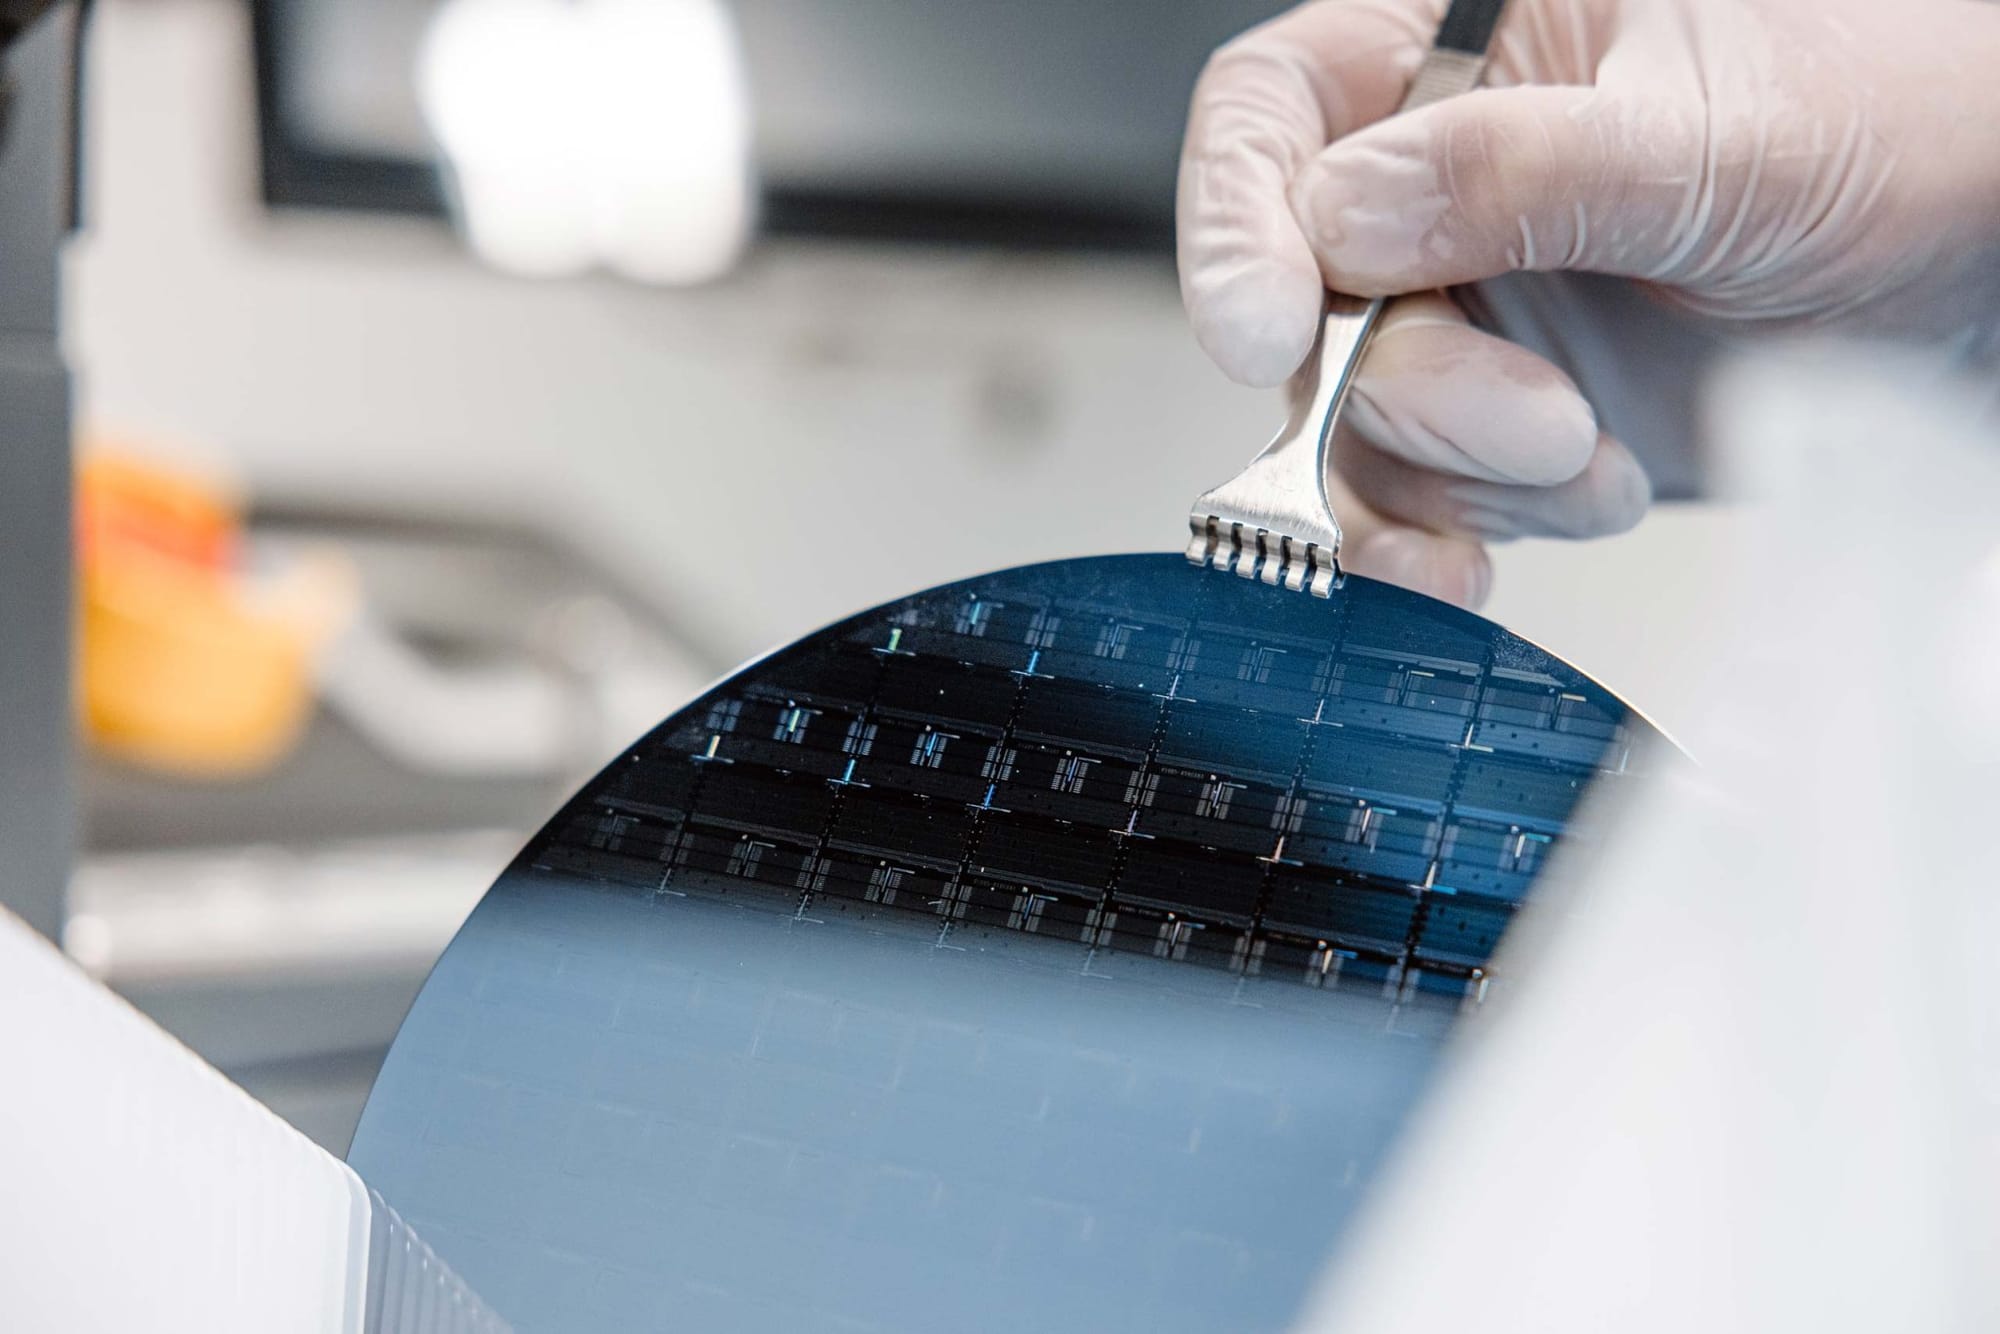 Black Semiconductor secured €254.4M for its graphene-based chip-interconnect technology